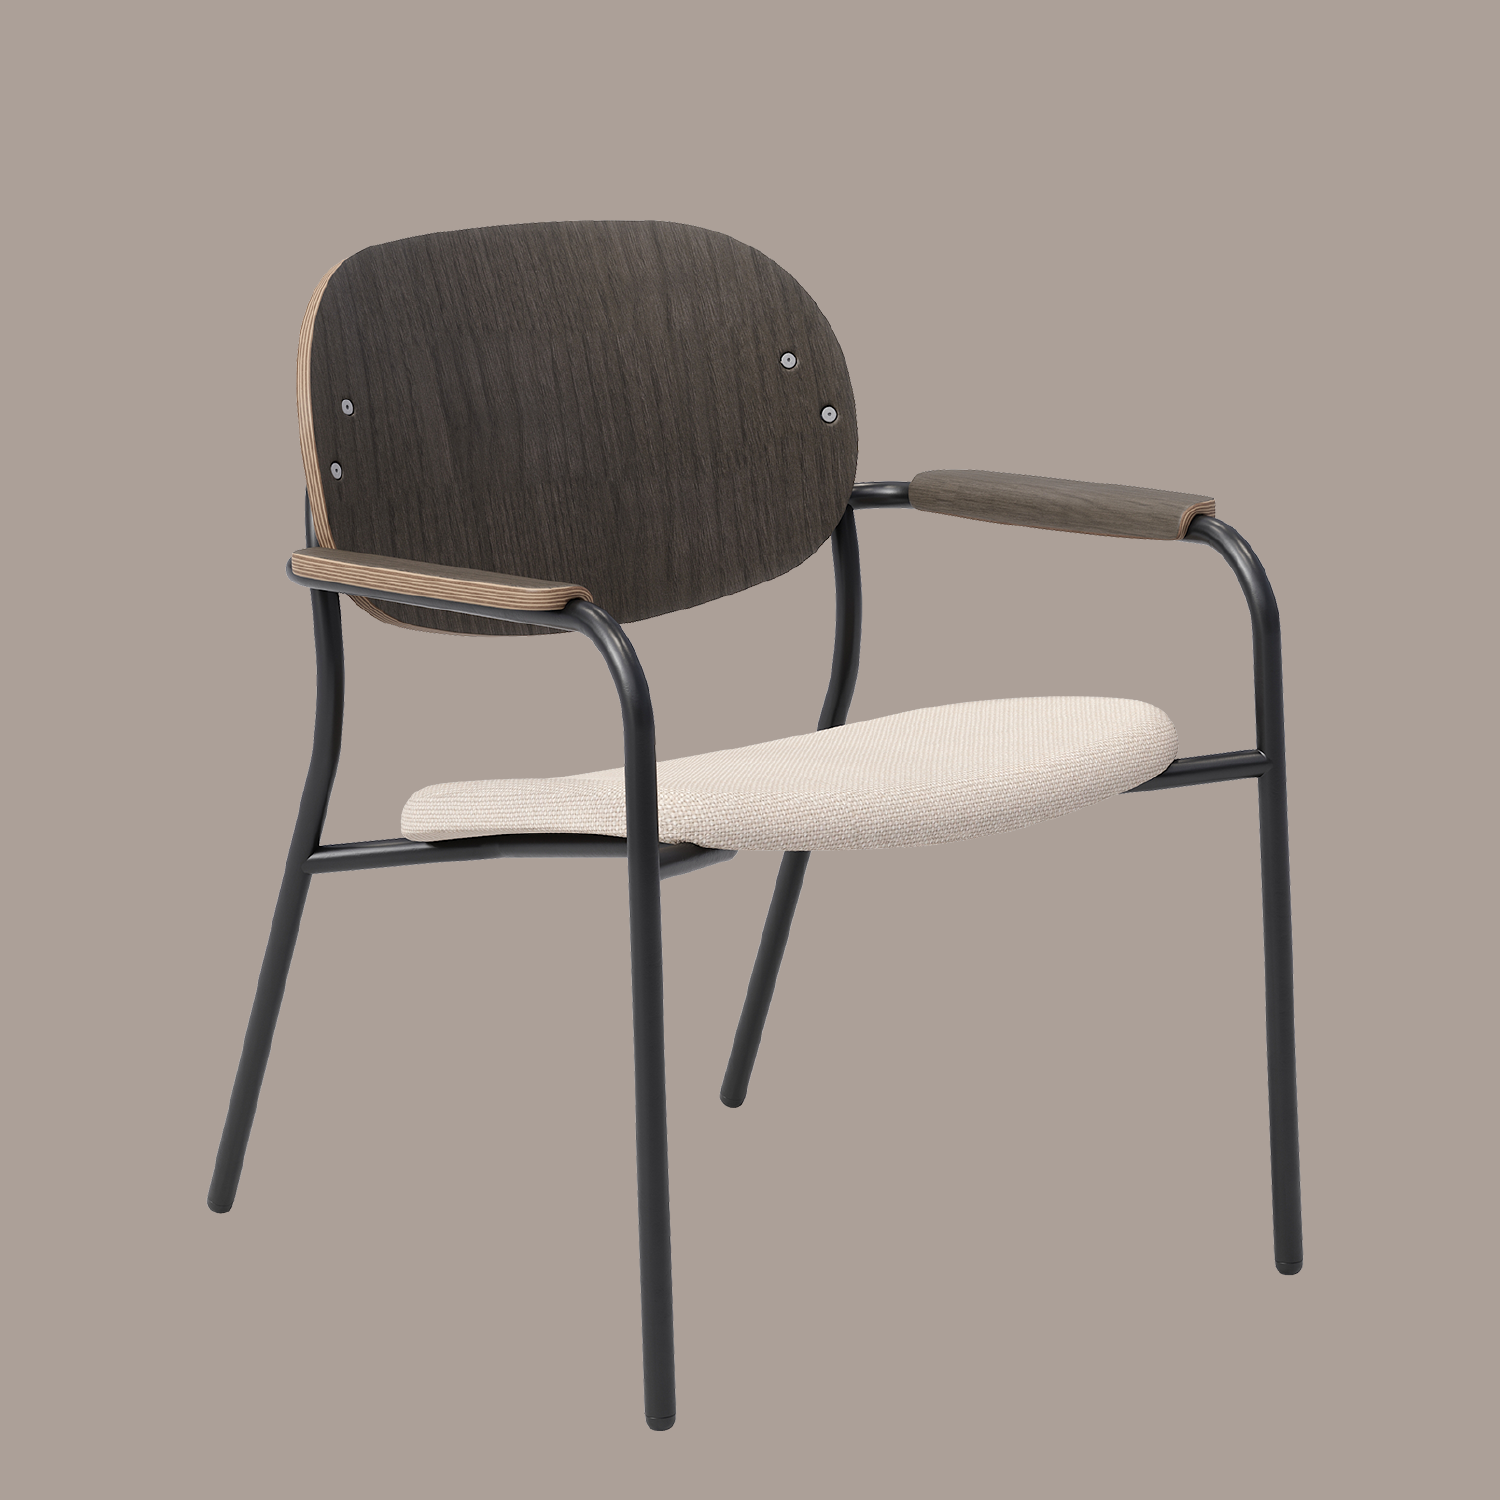 Tioga lounge chair with arms, design by Union Design